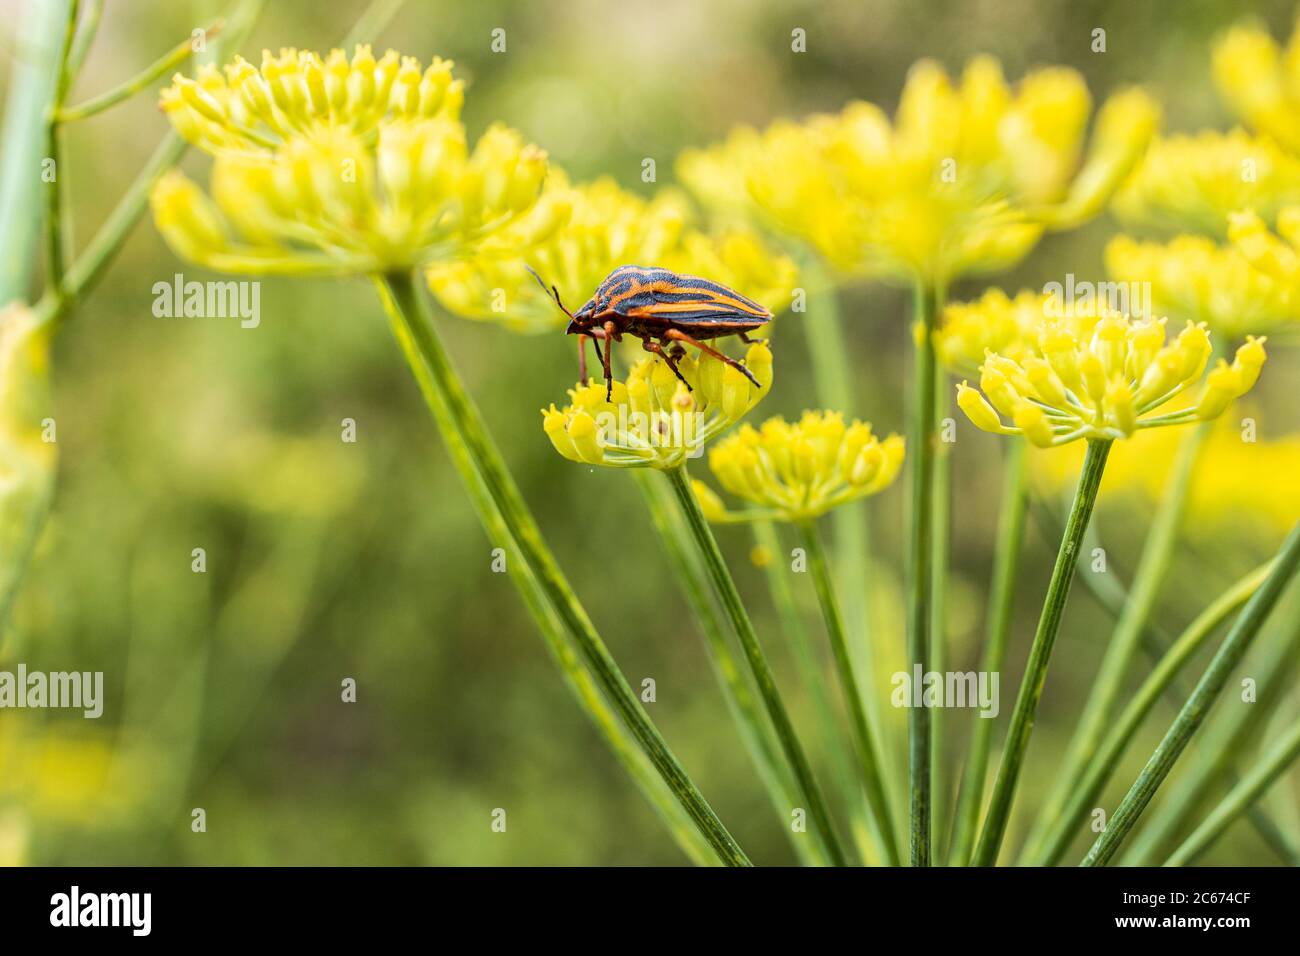 Graphosoma italicum red and black striped shield bug on yellow fennel flower in Masca, Tenerife, Canary Islands, Spain Stock Photo